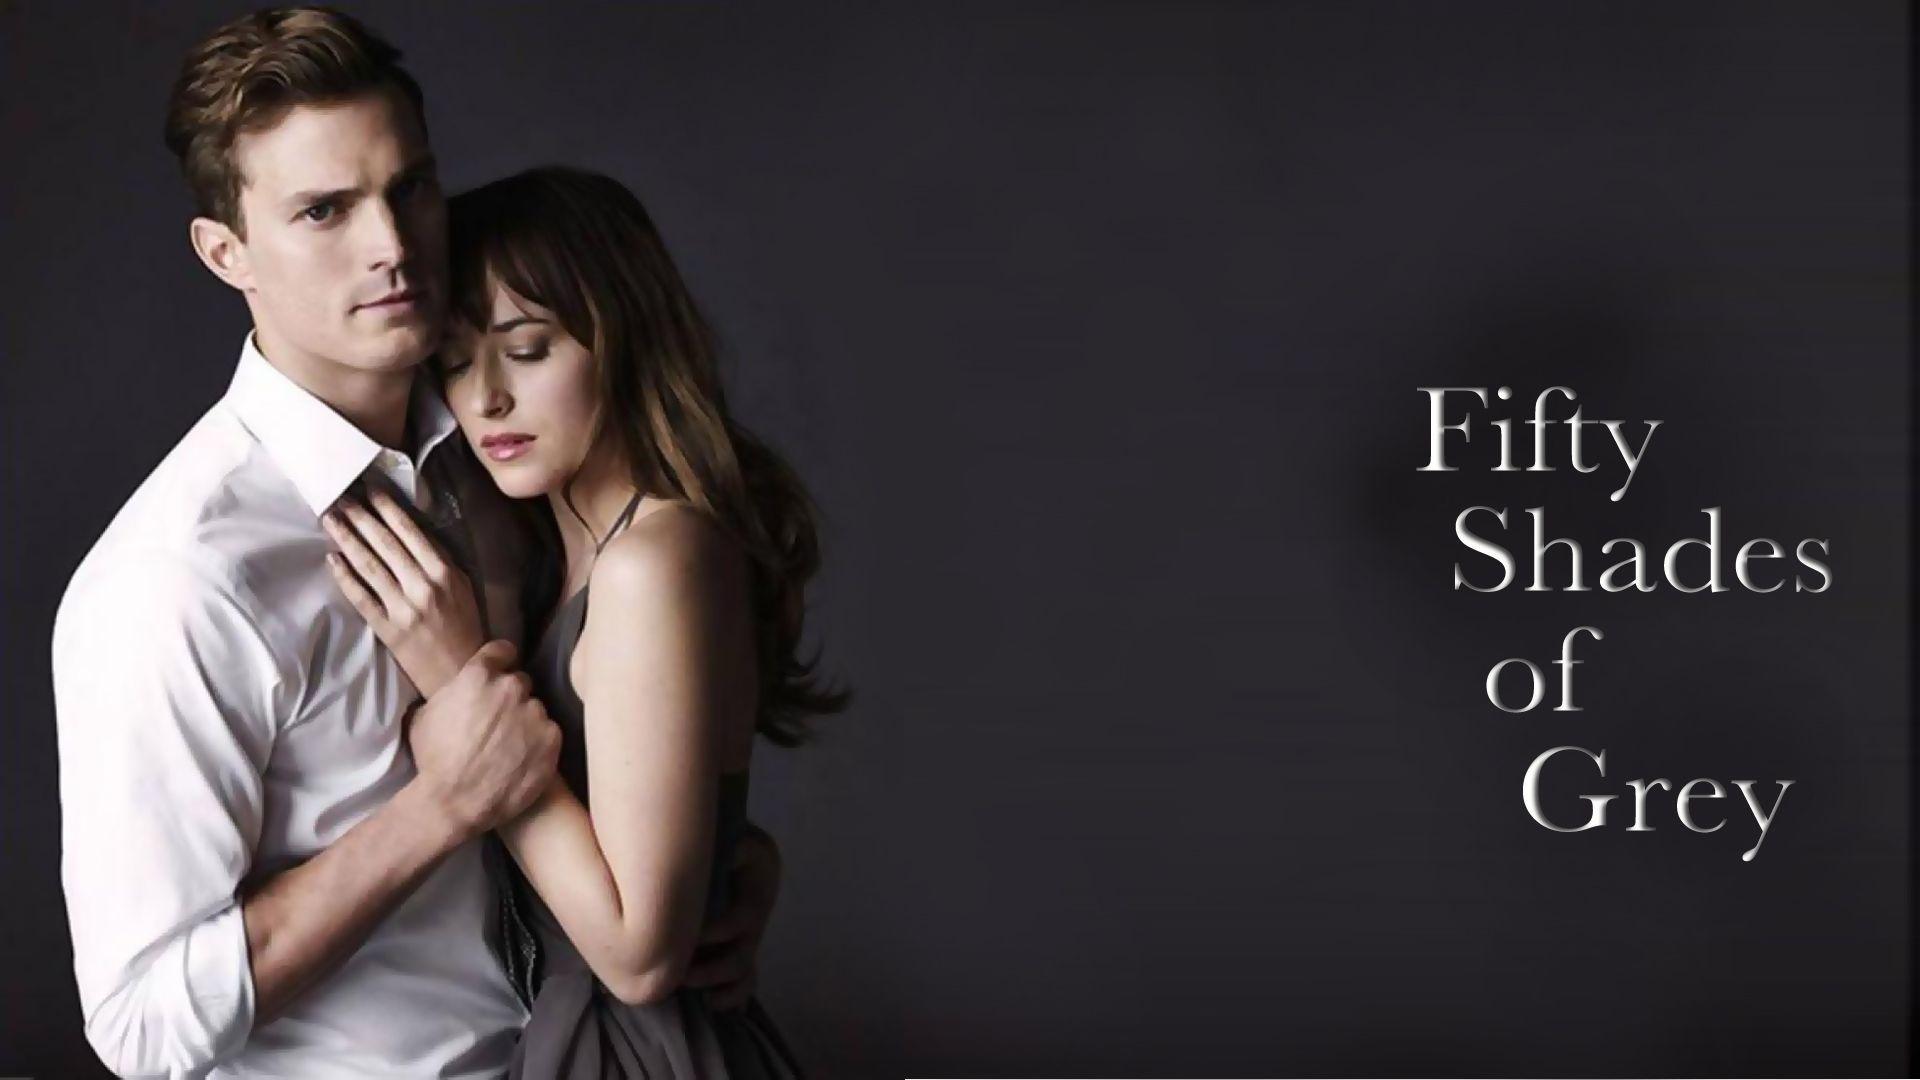 50 shades of gray audio book mp3 torrents